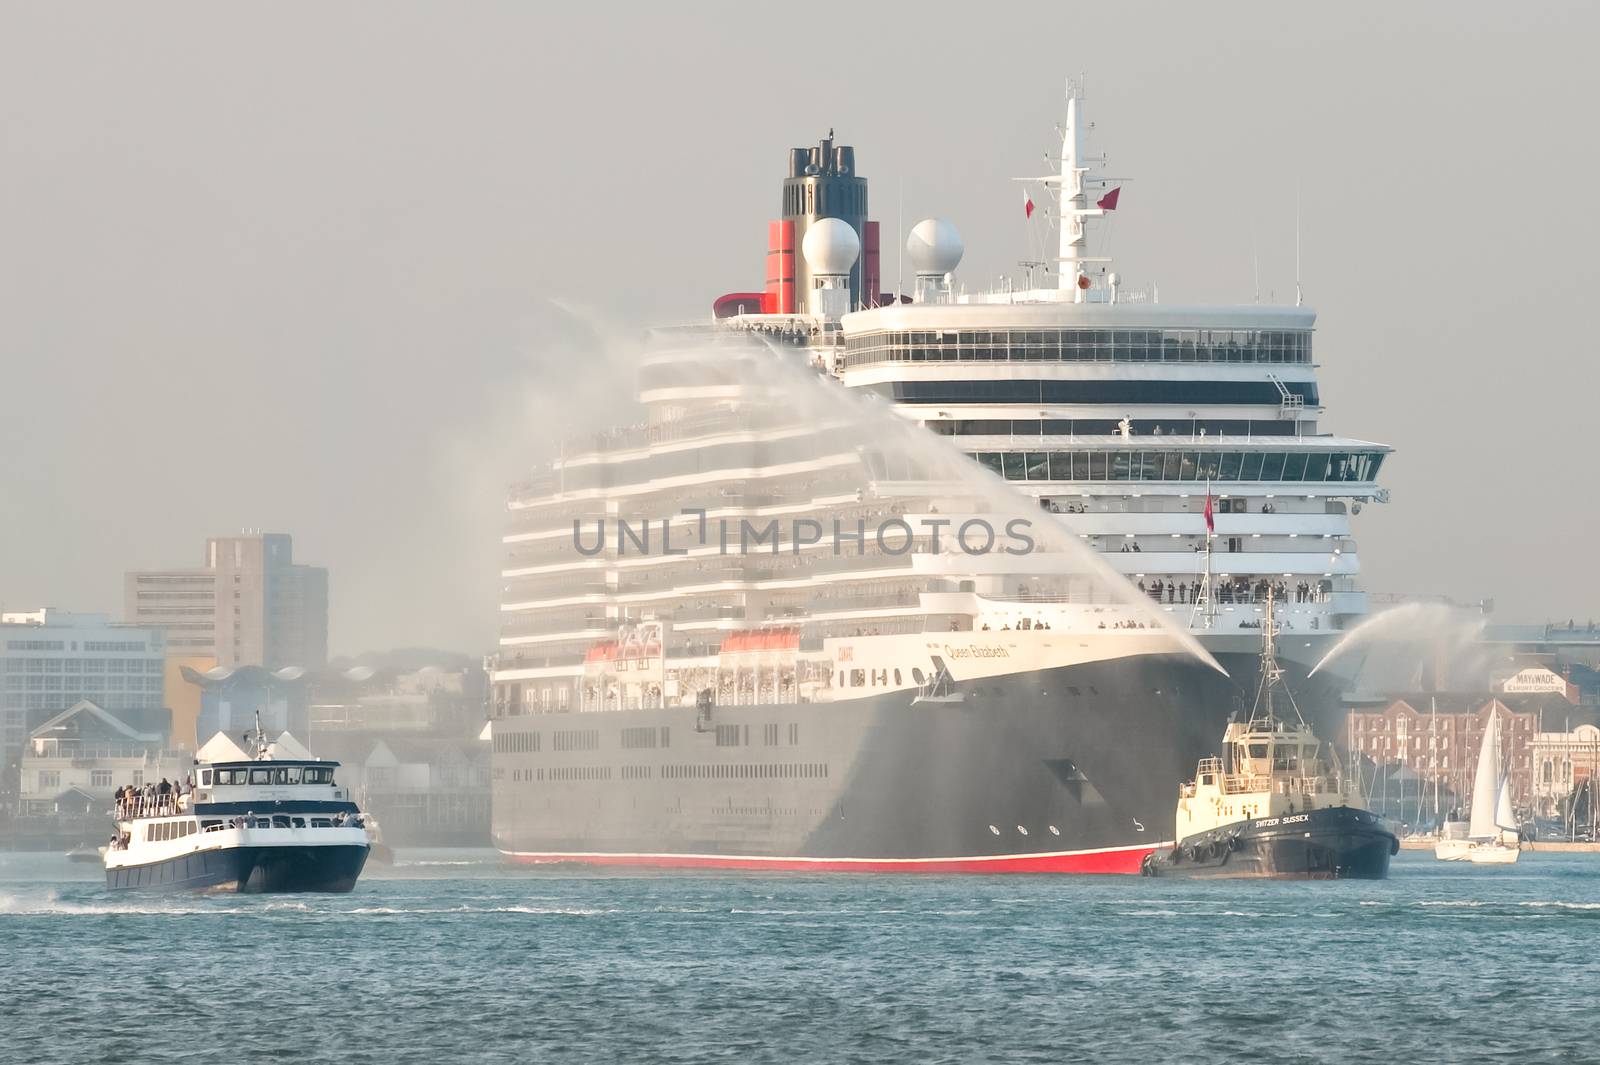 Southampton, UK - October 12, 2010: A hazy sunset departure from port for the Queen Elizabeth cruise liner on her maiden voyage from Southampton, UK